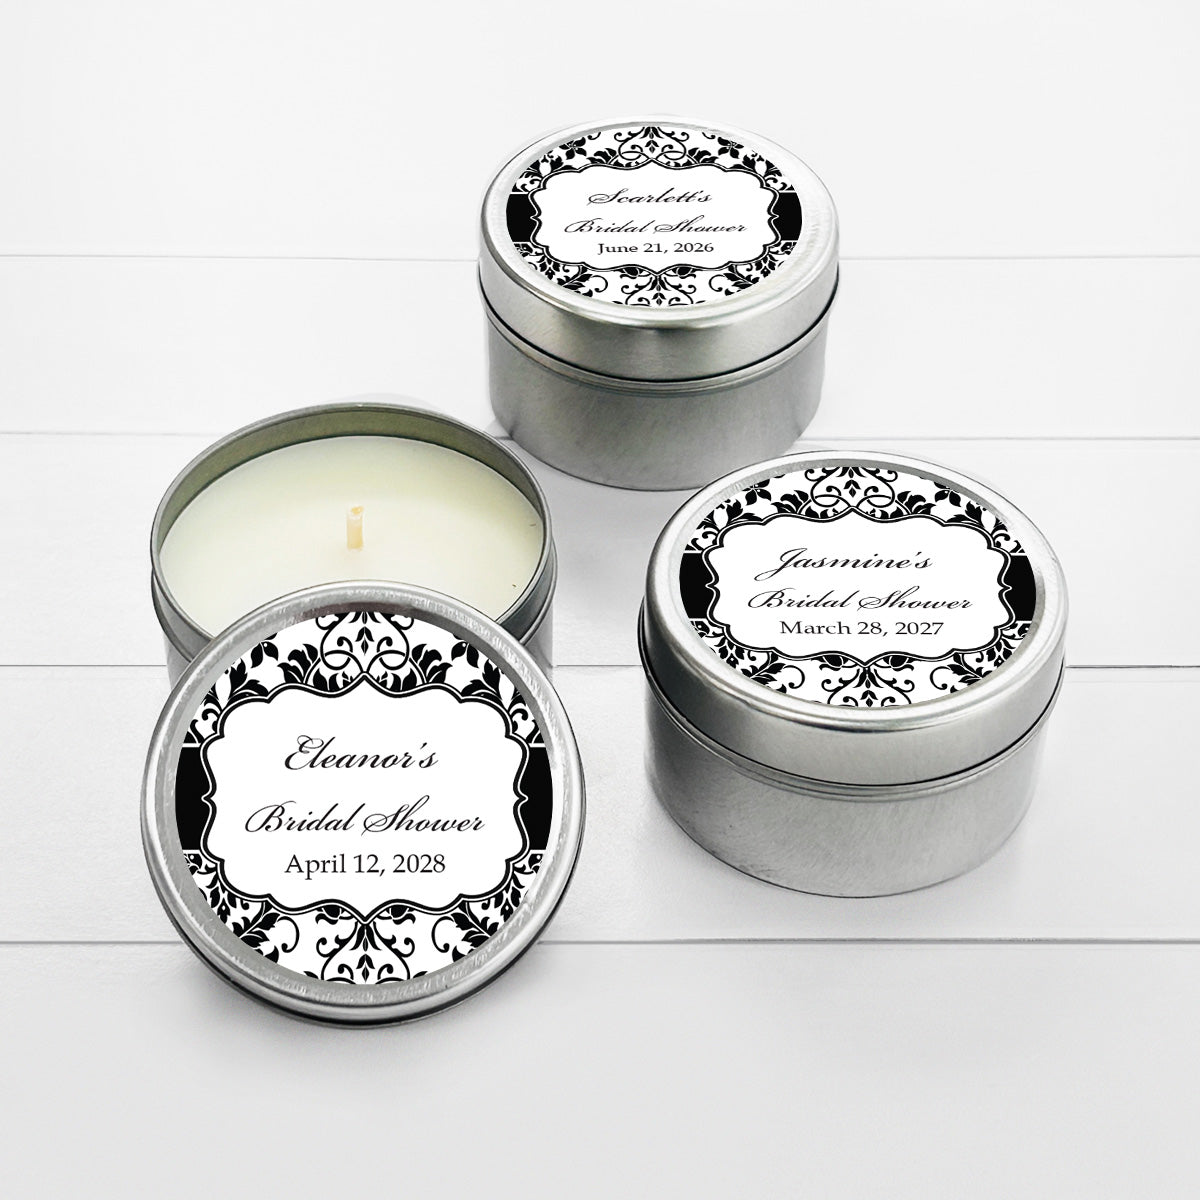 Bridal Shower Personalized Round Travel Candle Tins (set of 12)